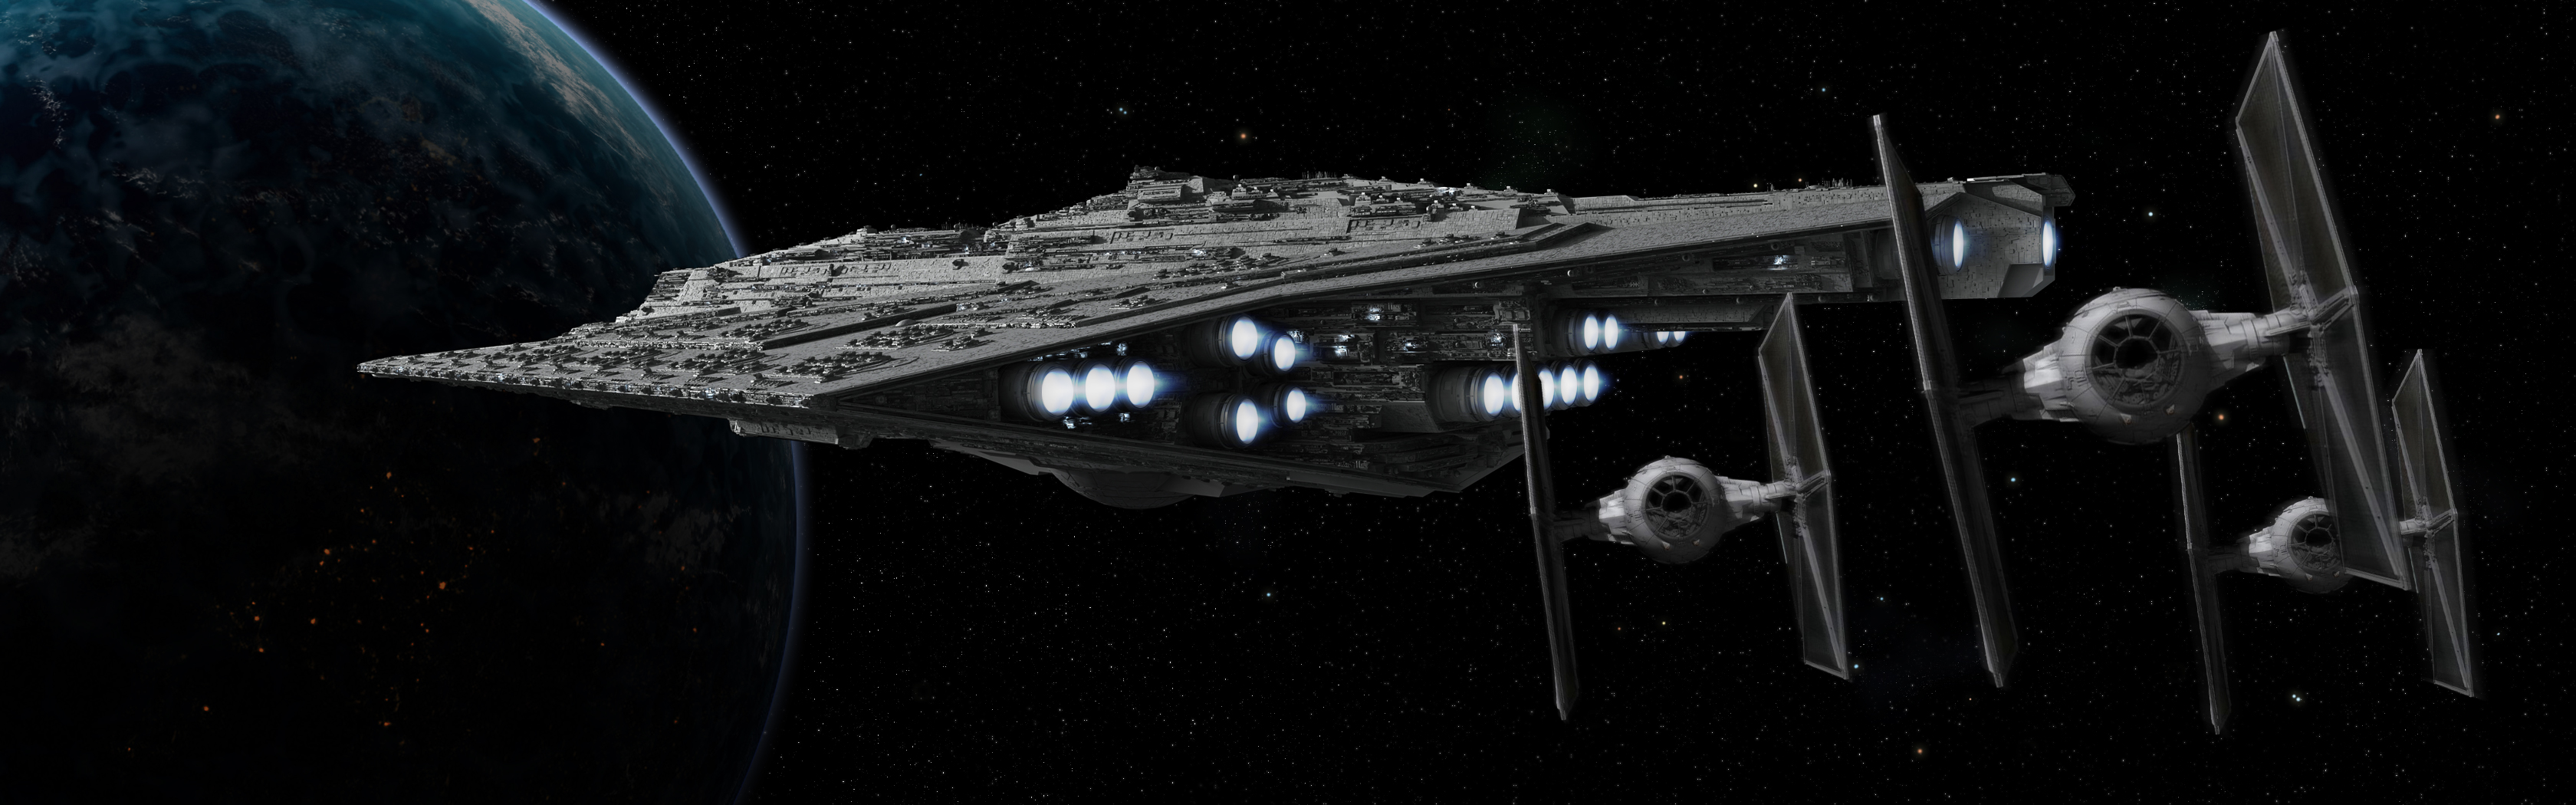 Star Wars Destroyer Fighters Wallpaper And Background Image